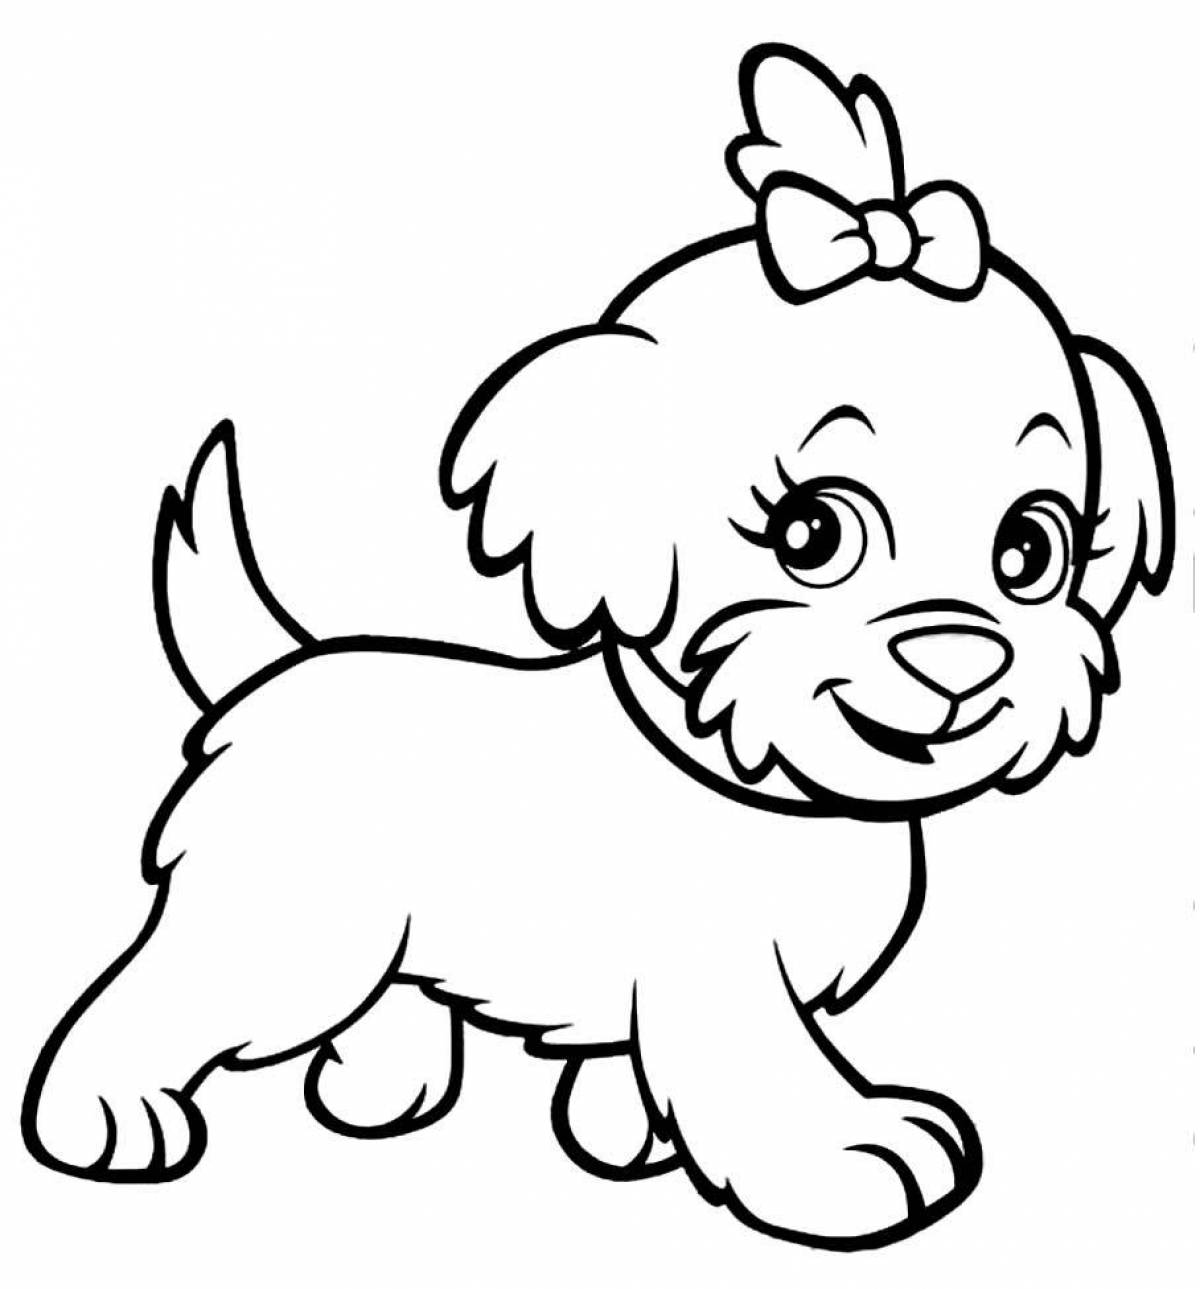 Adorable dog coloring book for students